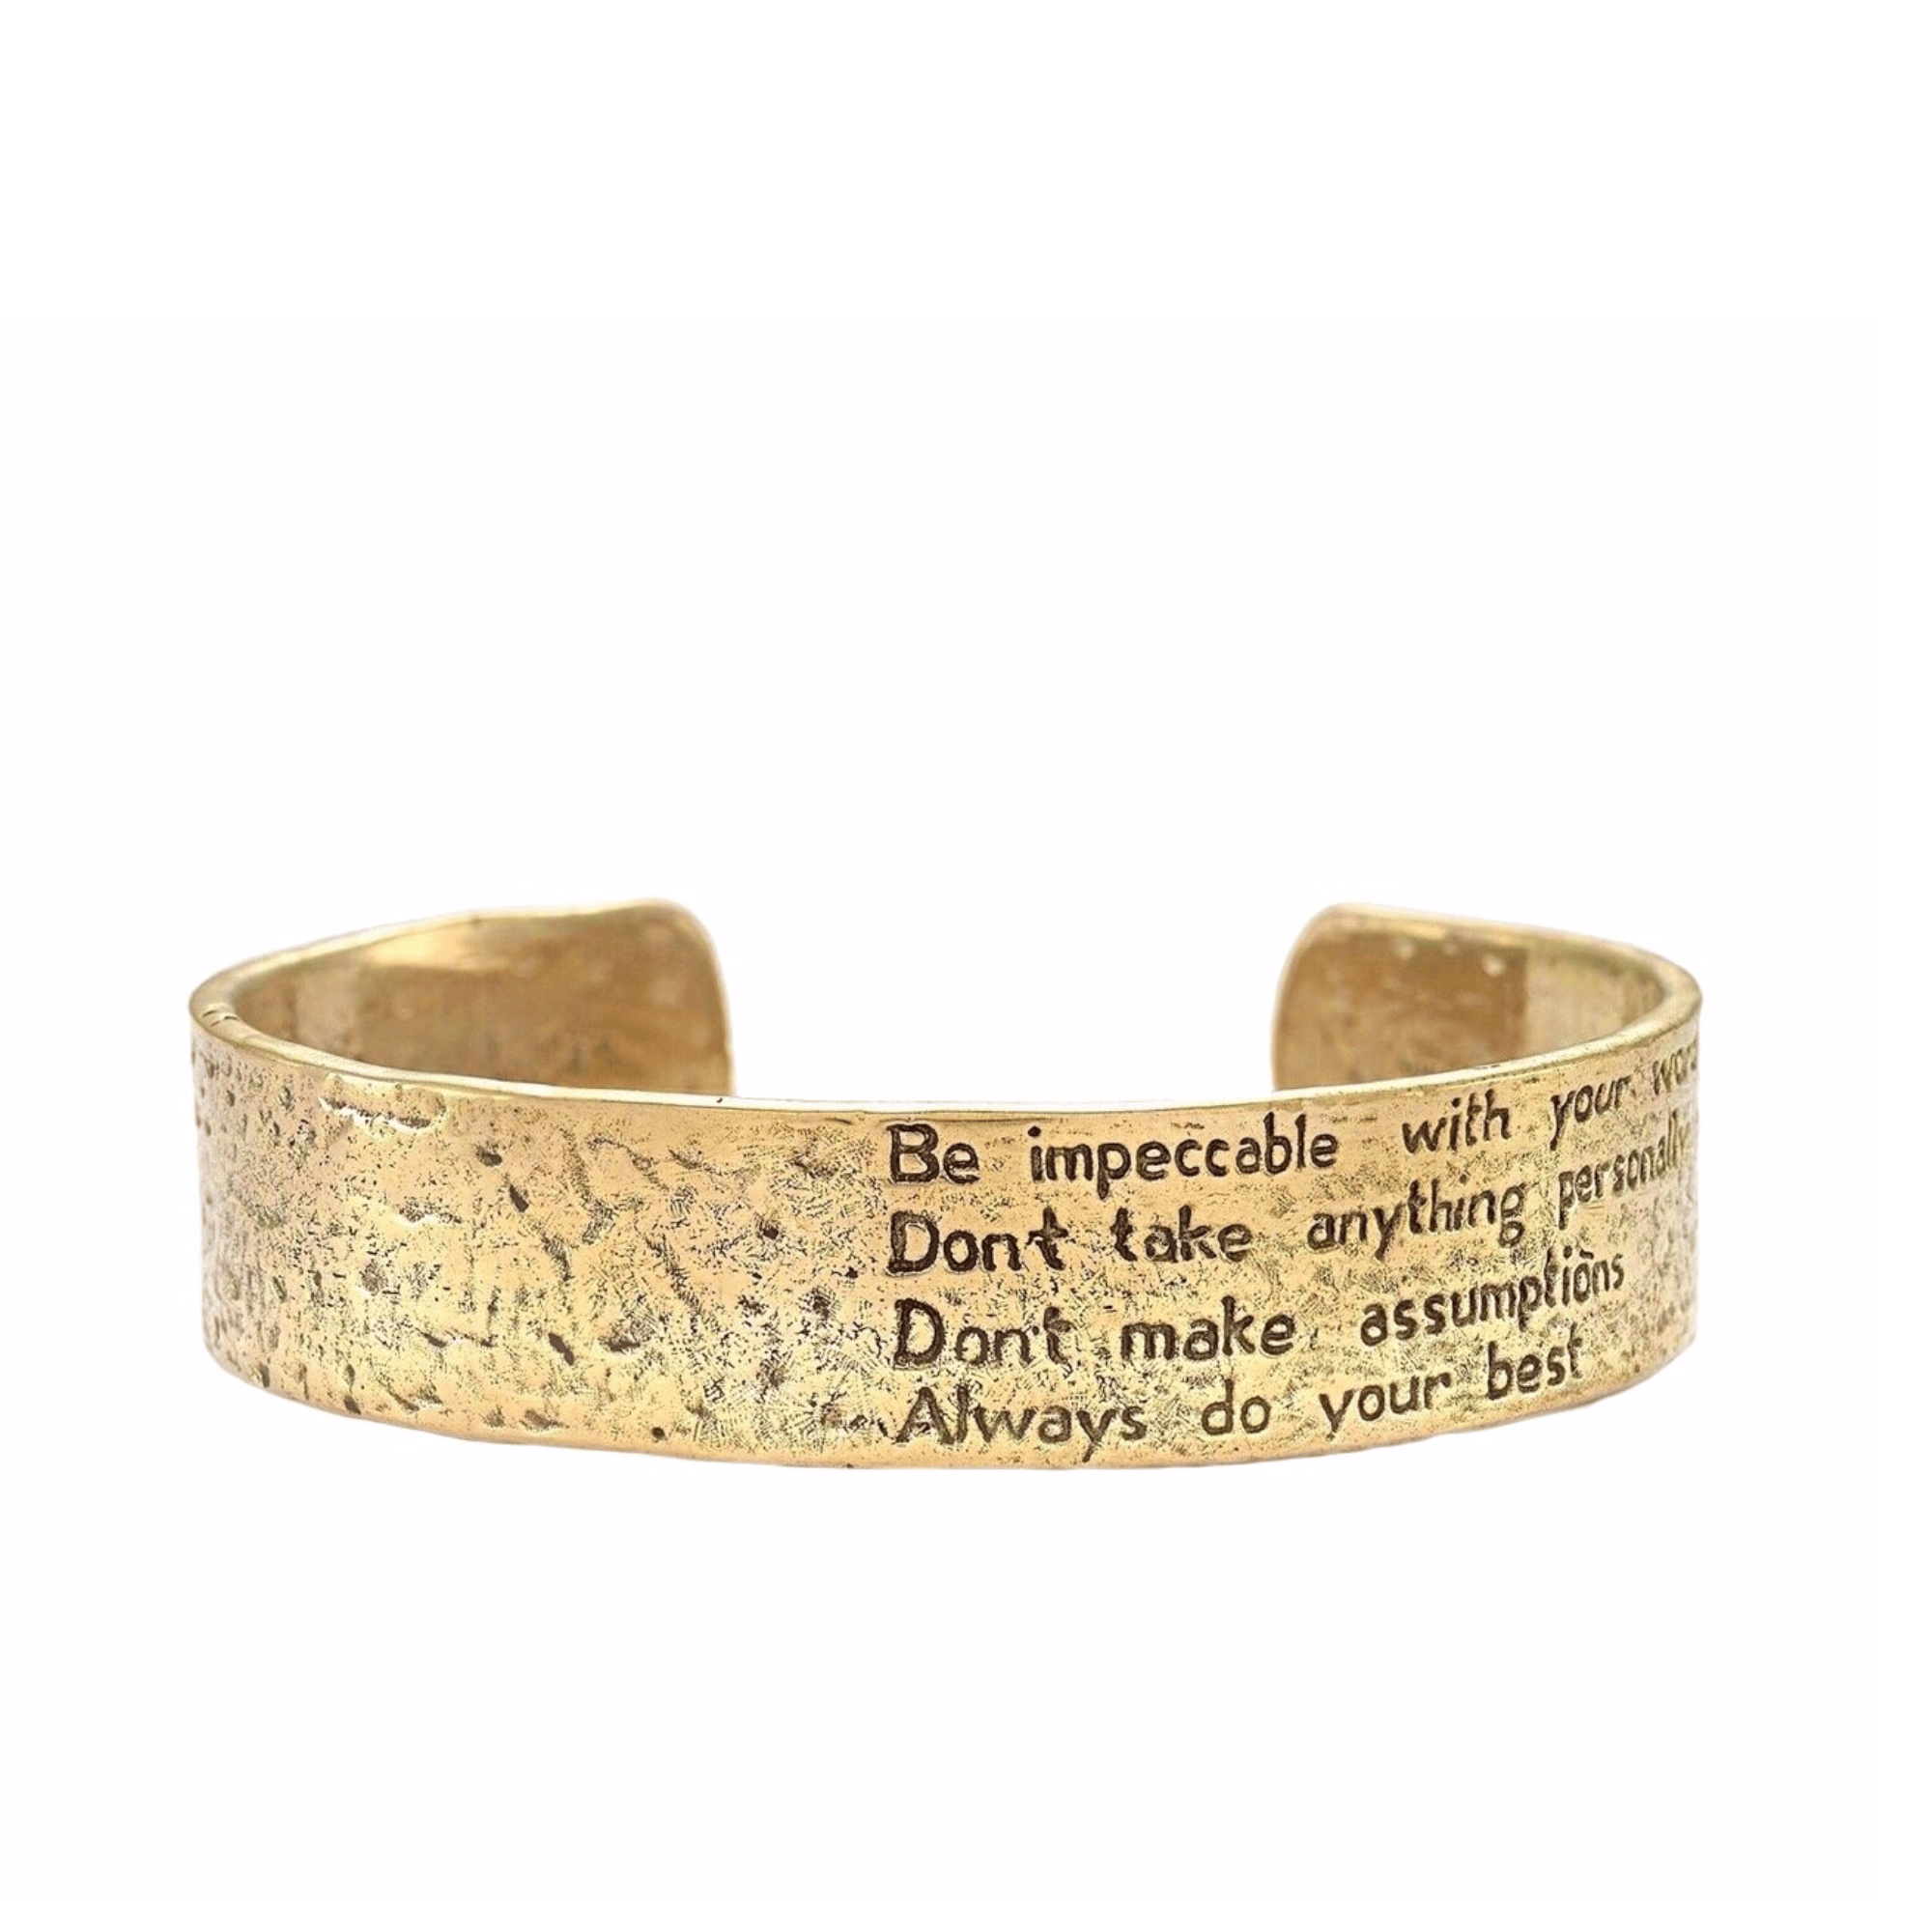 Jewelry Evolution Bracelet Small / Brass / Antiqued Texture The Four Agreements Matte Textured Cuff